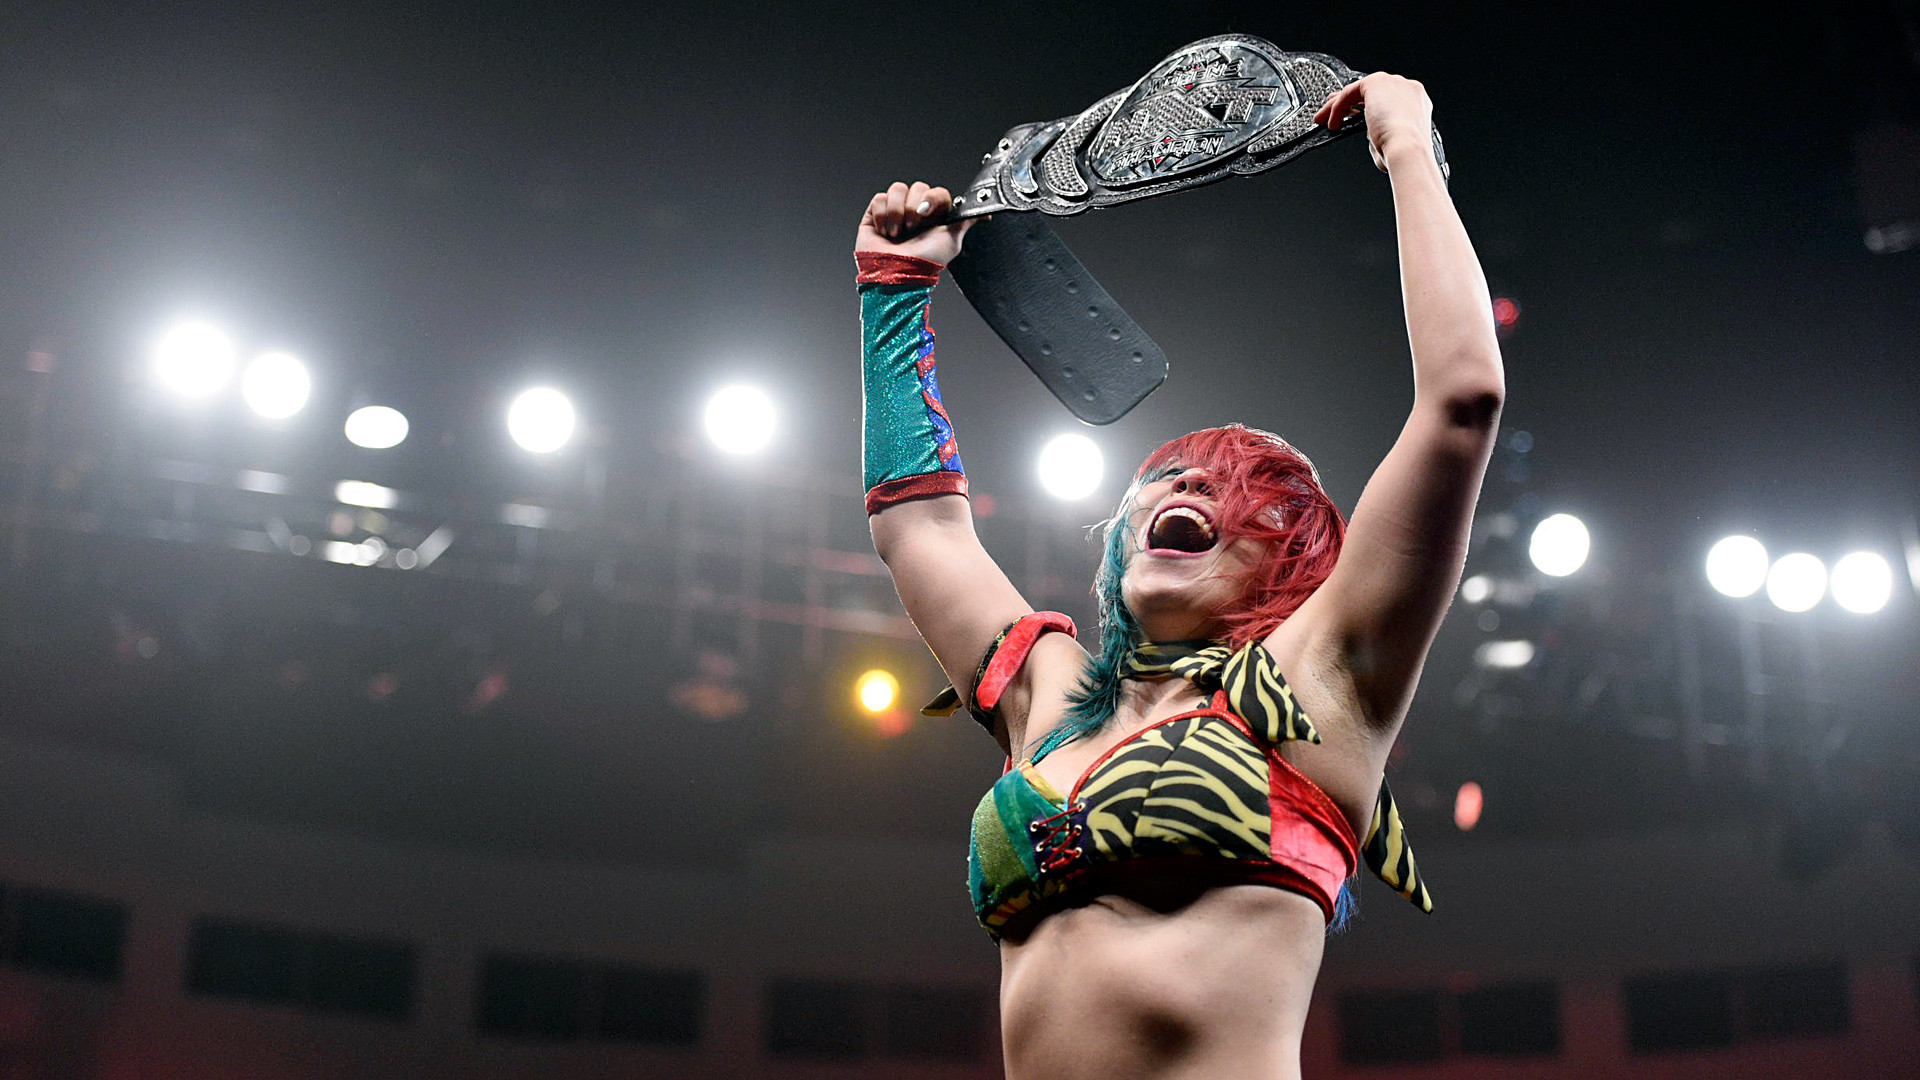 1920x1080 Asuka becomes longest reigning NXT Women's Champion ever